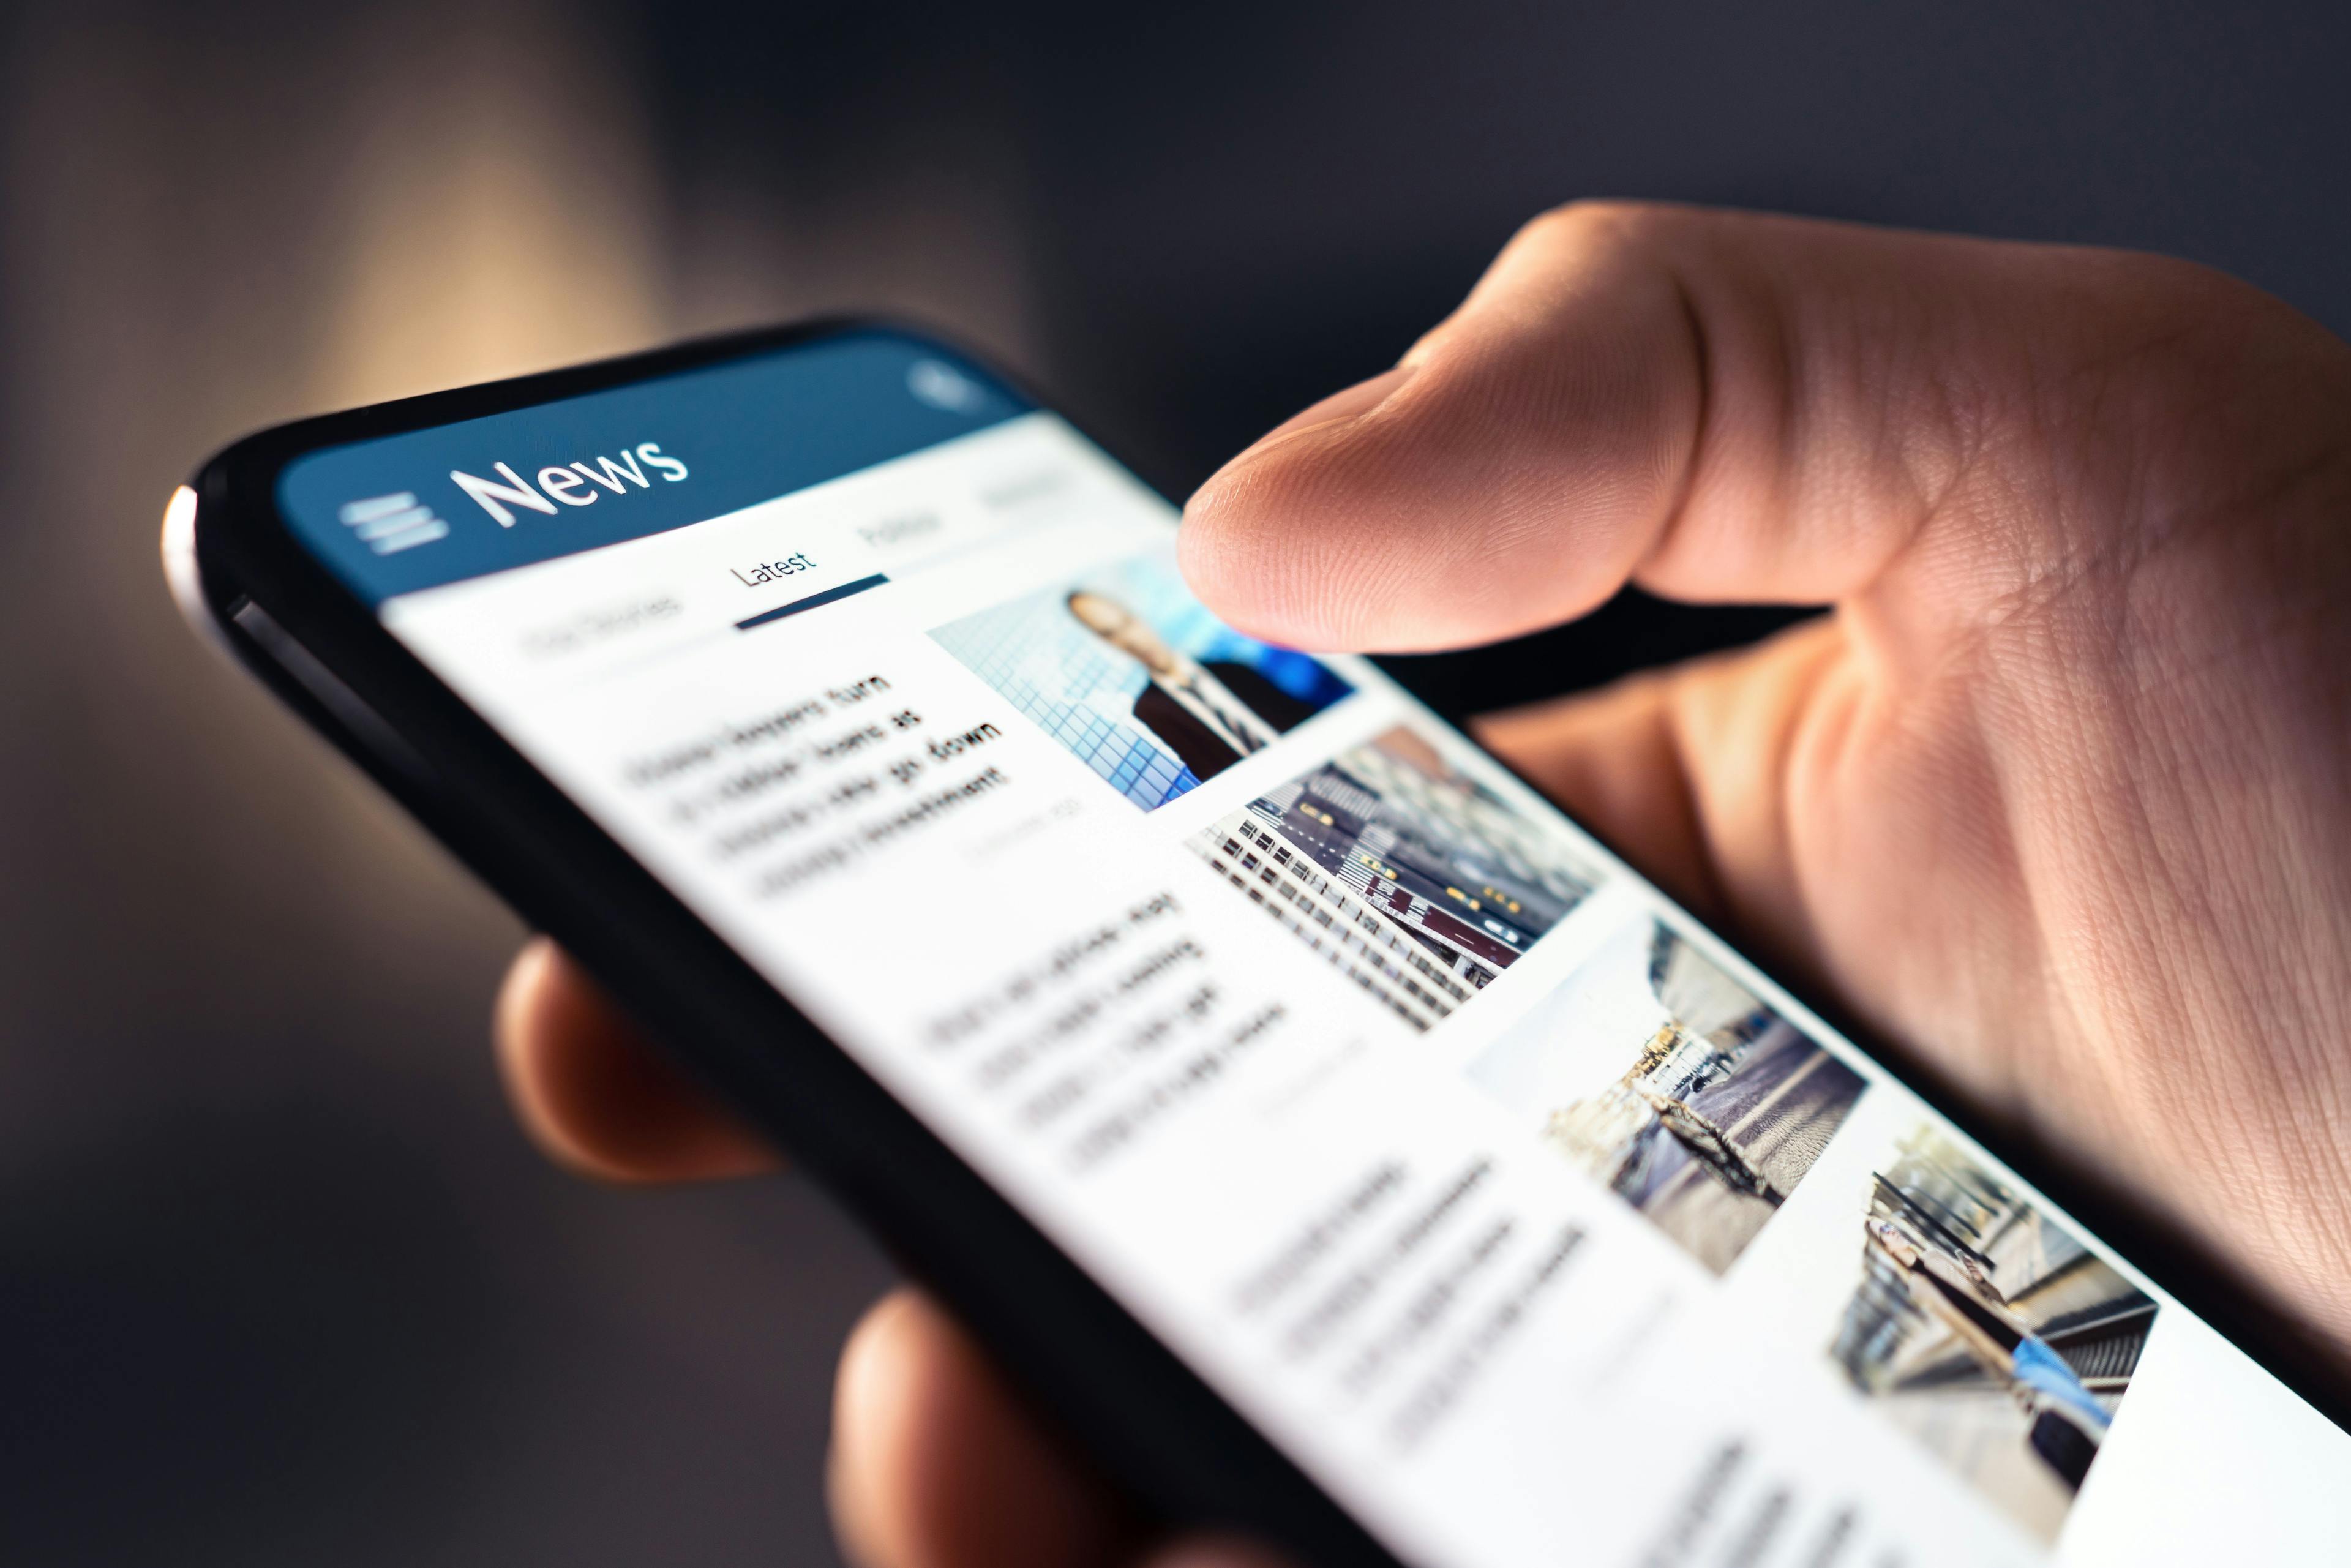 News feed in phone. Watching and reading latest online articles and headlines from smartphone newspaper mobile app. Daily digital information portal and publication. Media and press on internet. | Image Credit: © terovesalainen - stock.adobe.com.